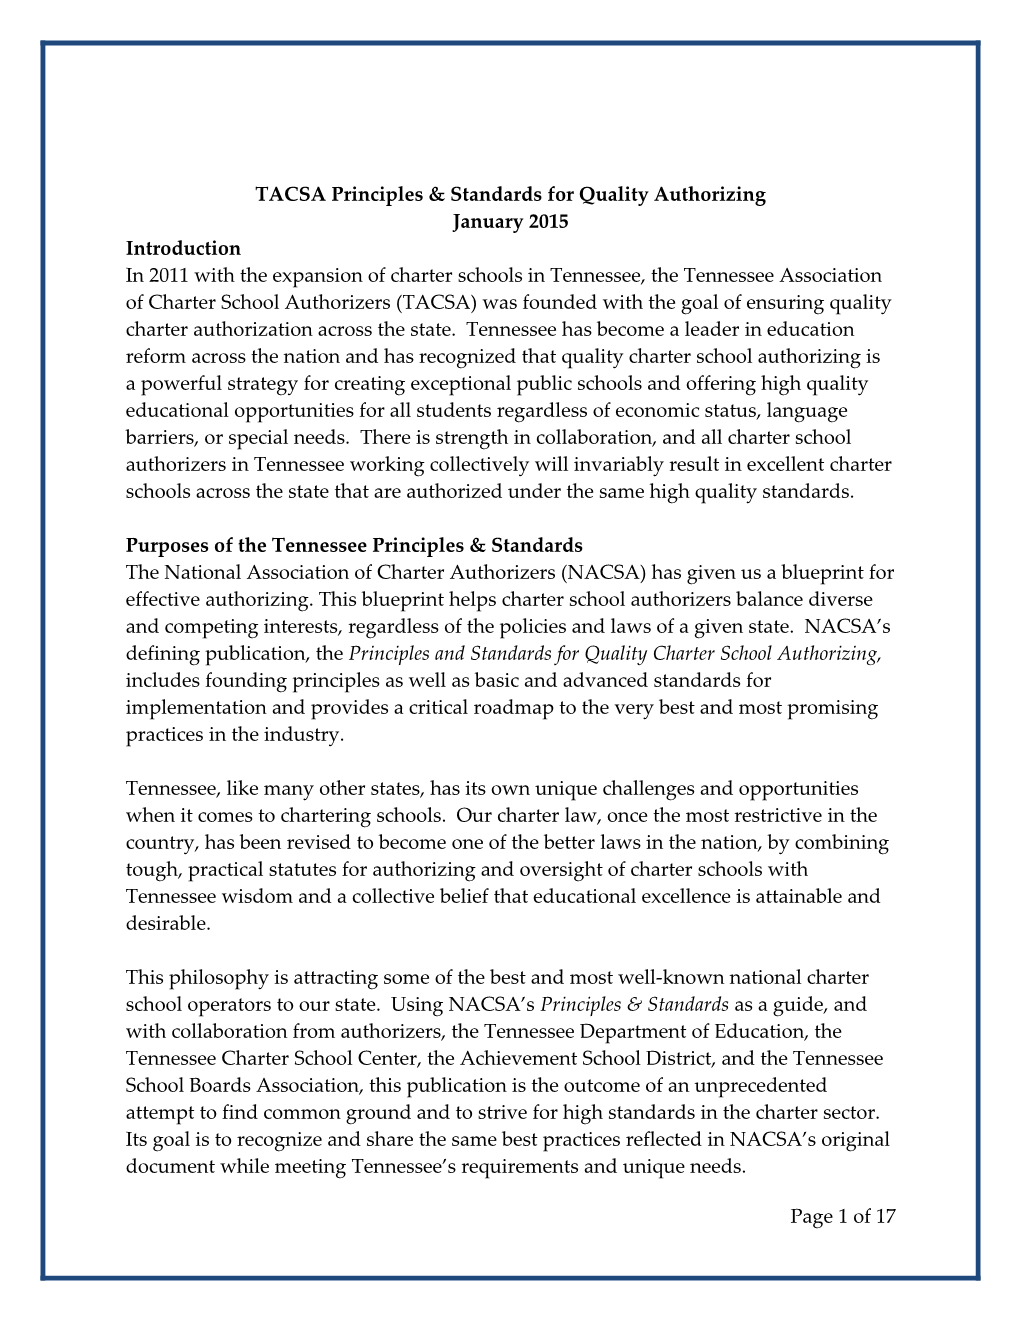 TACSA Principles & Standards for Quality Authorizing